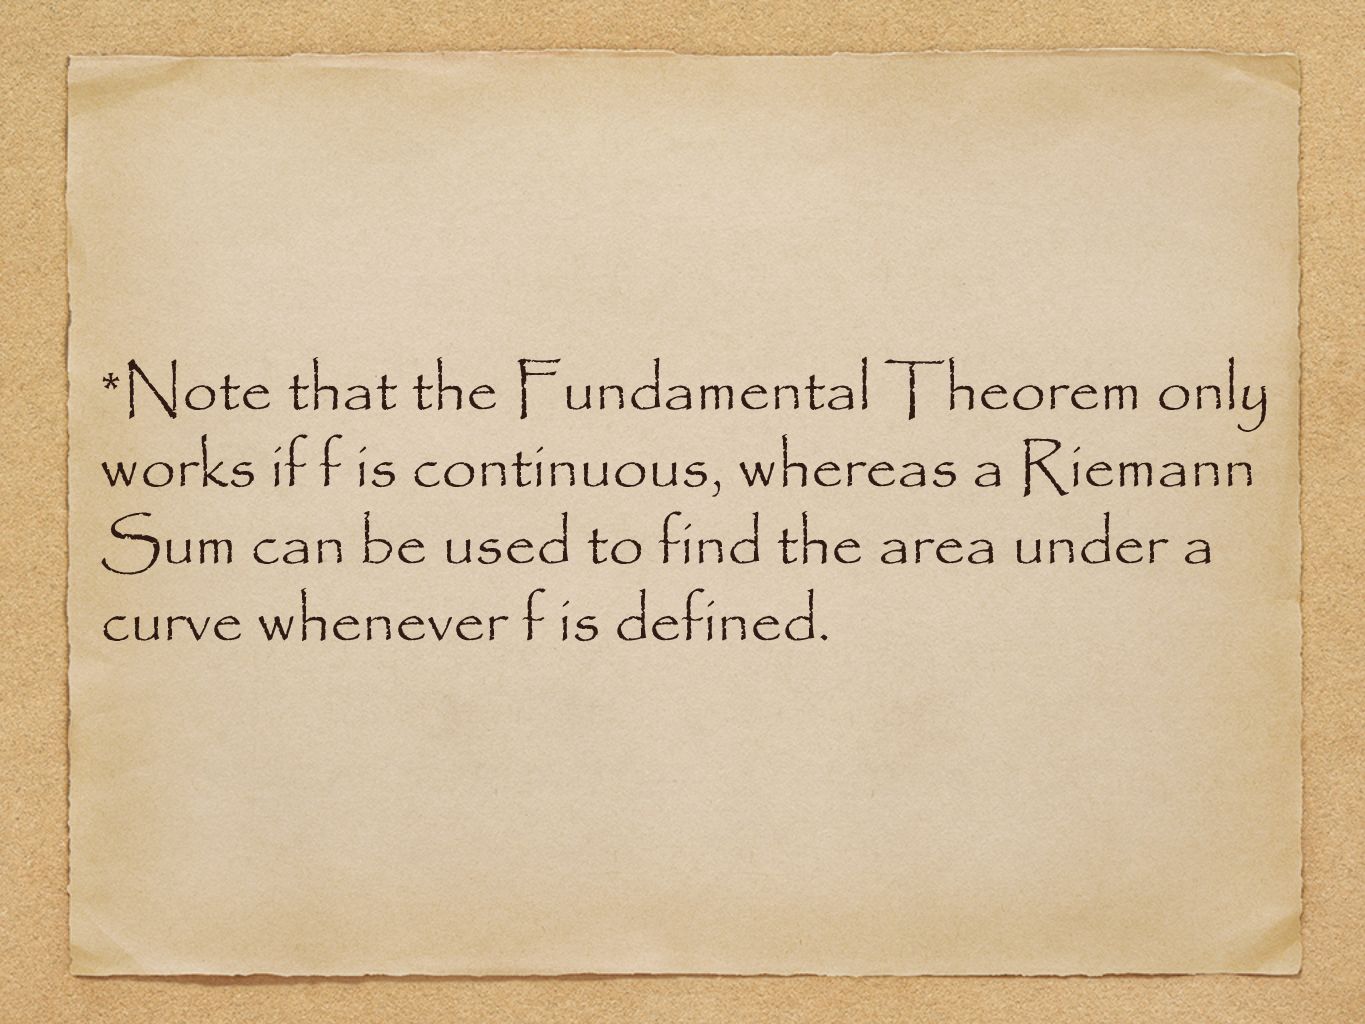 *Note that the Fundamental Theorem only works if f is continuous, whereas a Riemann Sum can be used to find the area under a curve whenever f is defined.